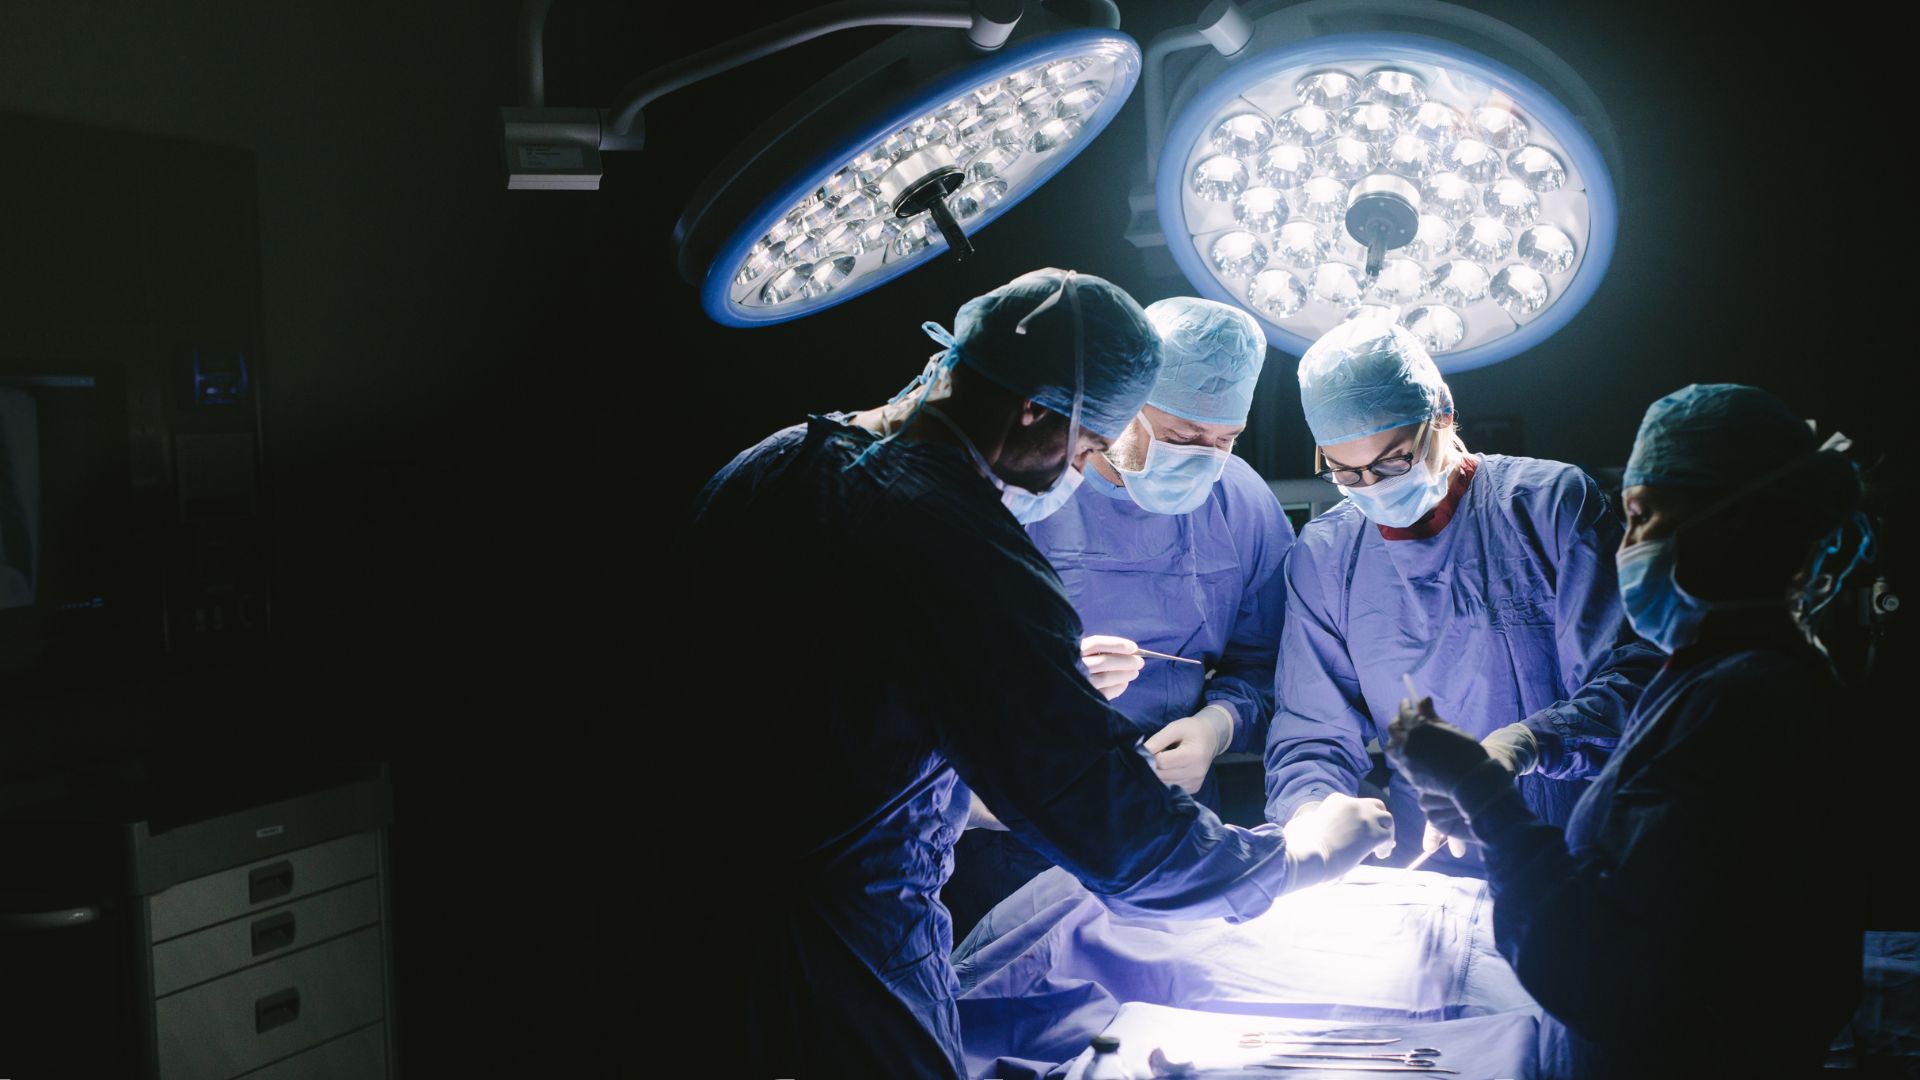 Four surgeons standing over a patient in an operating room with large powerful lights overhead. The surgeons are wearing blue scrubs, gloves, surgical masks, and hair nets.